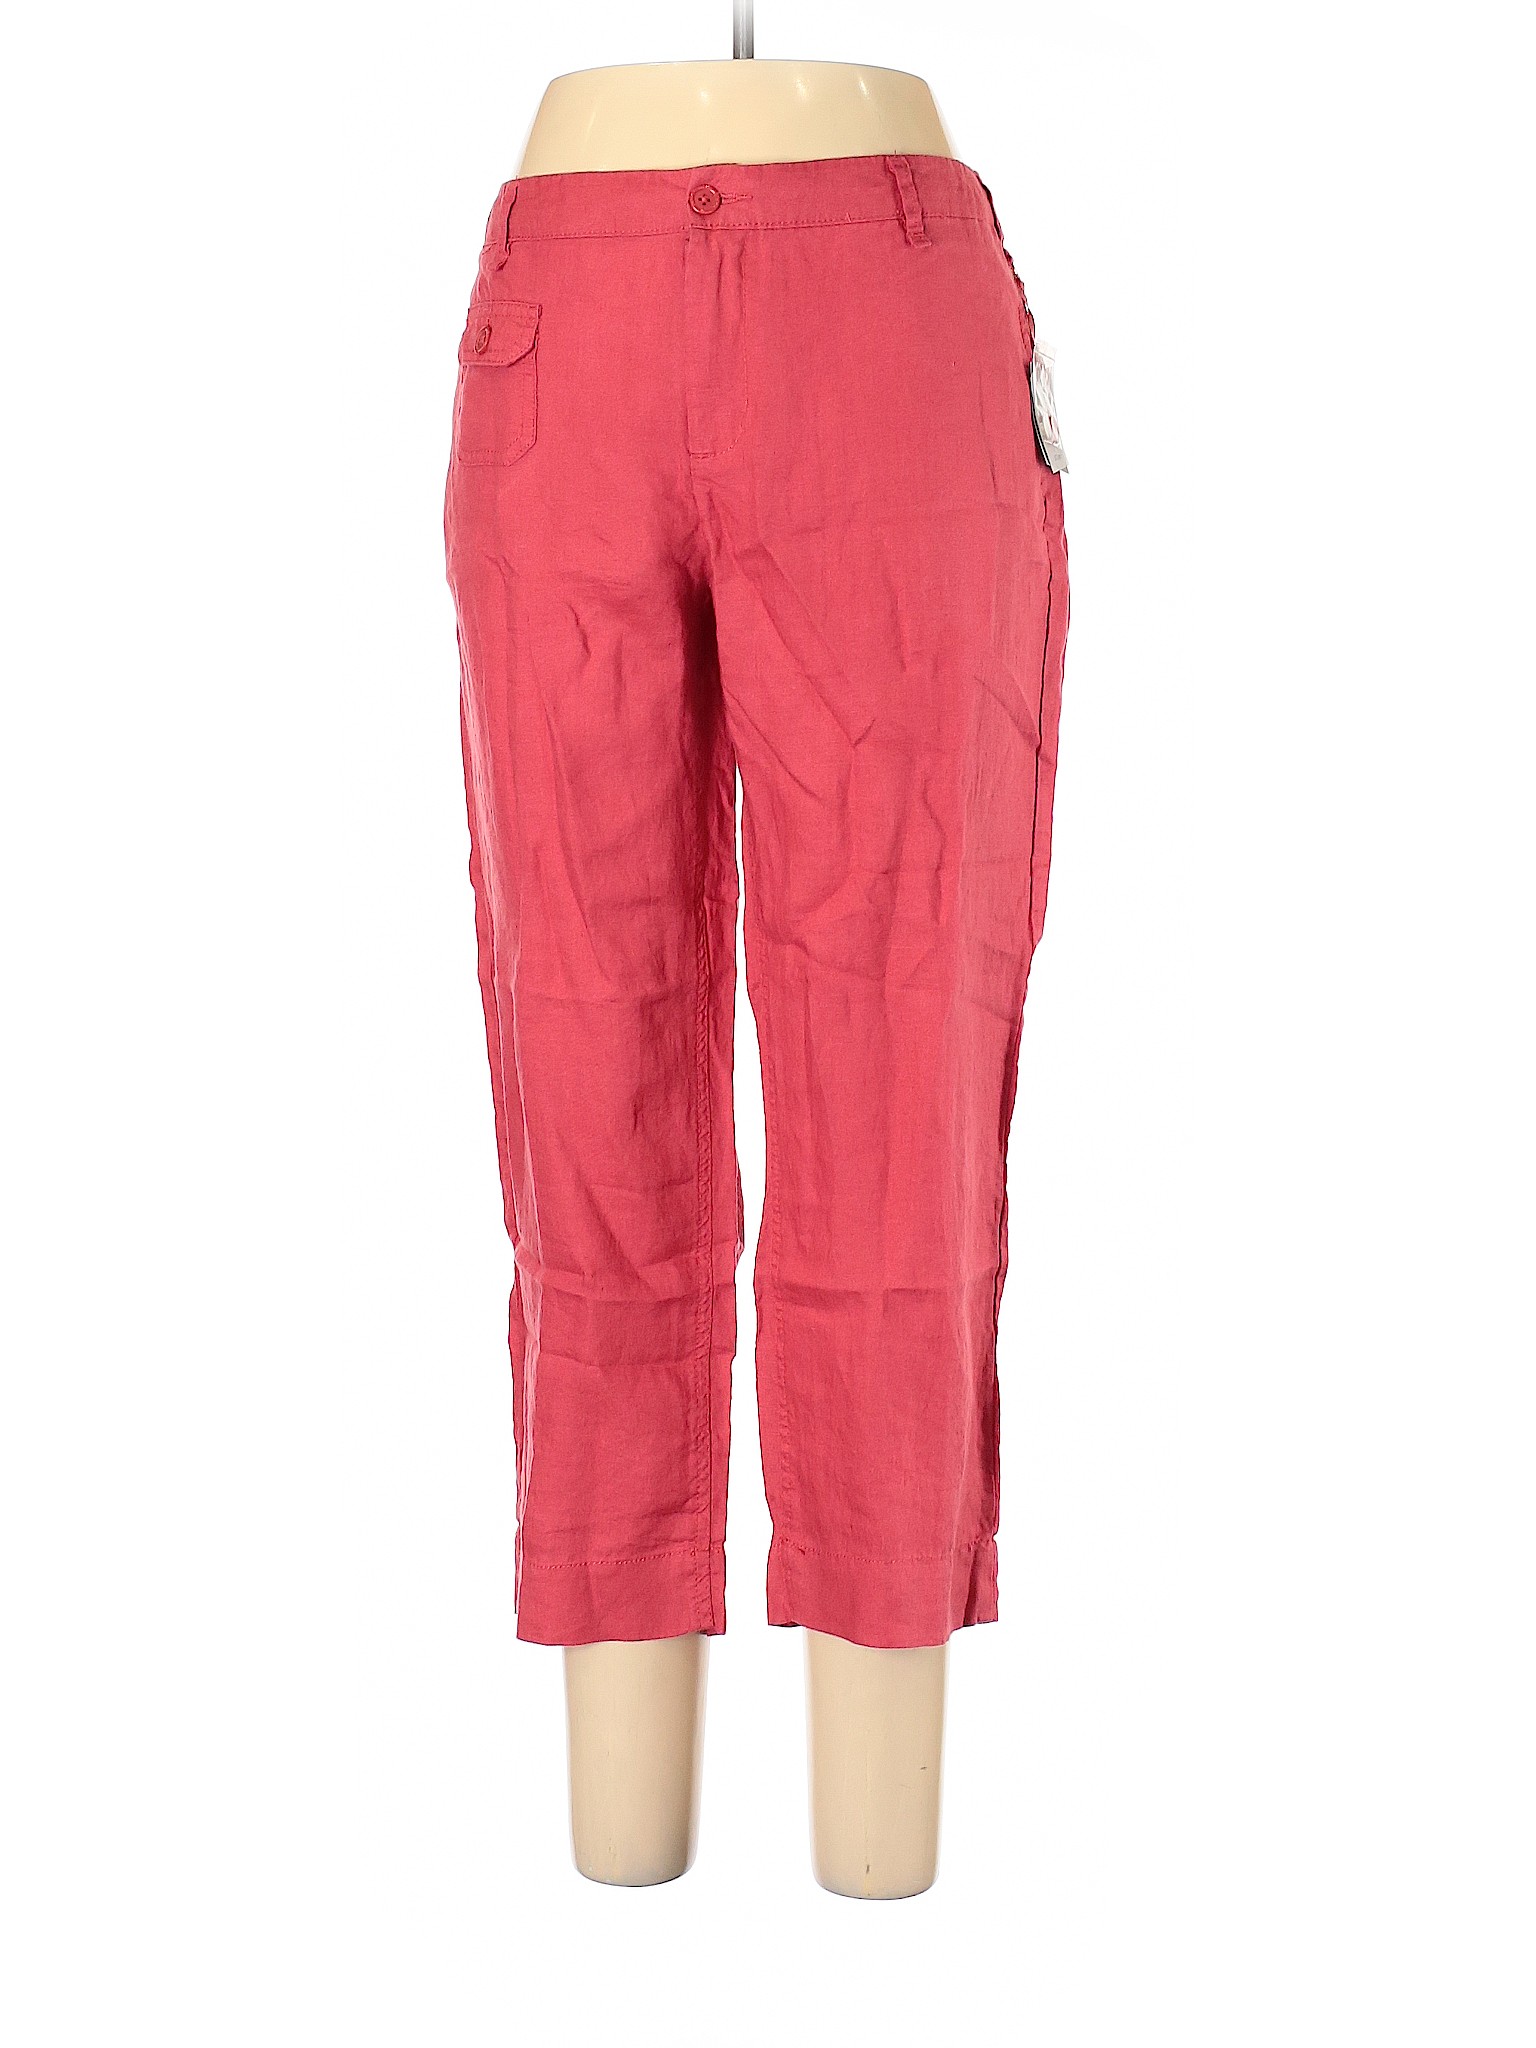 Cynthia Rowley TJX 100% Linen Pink Red Linen Pants Size 12 - 71% off ...